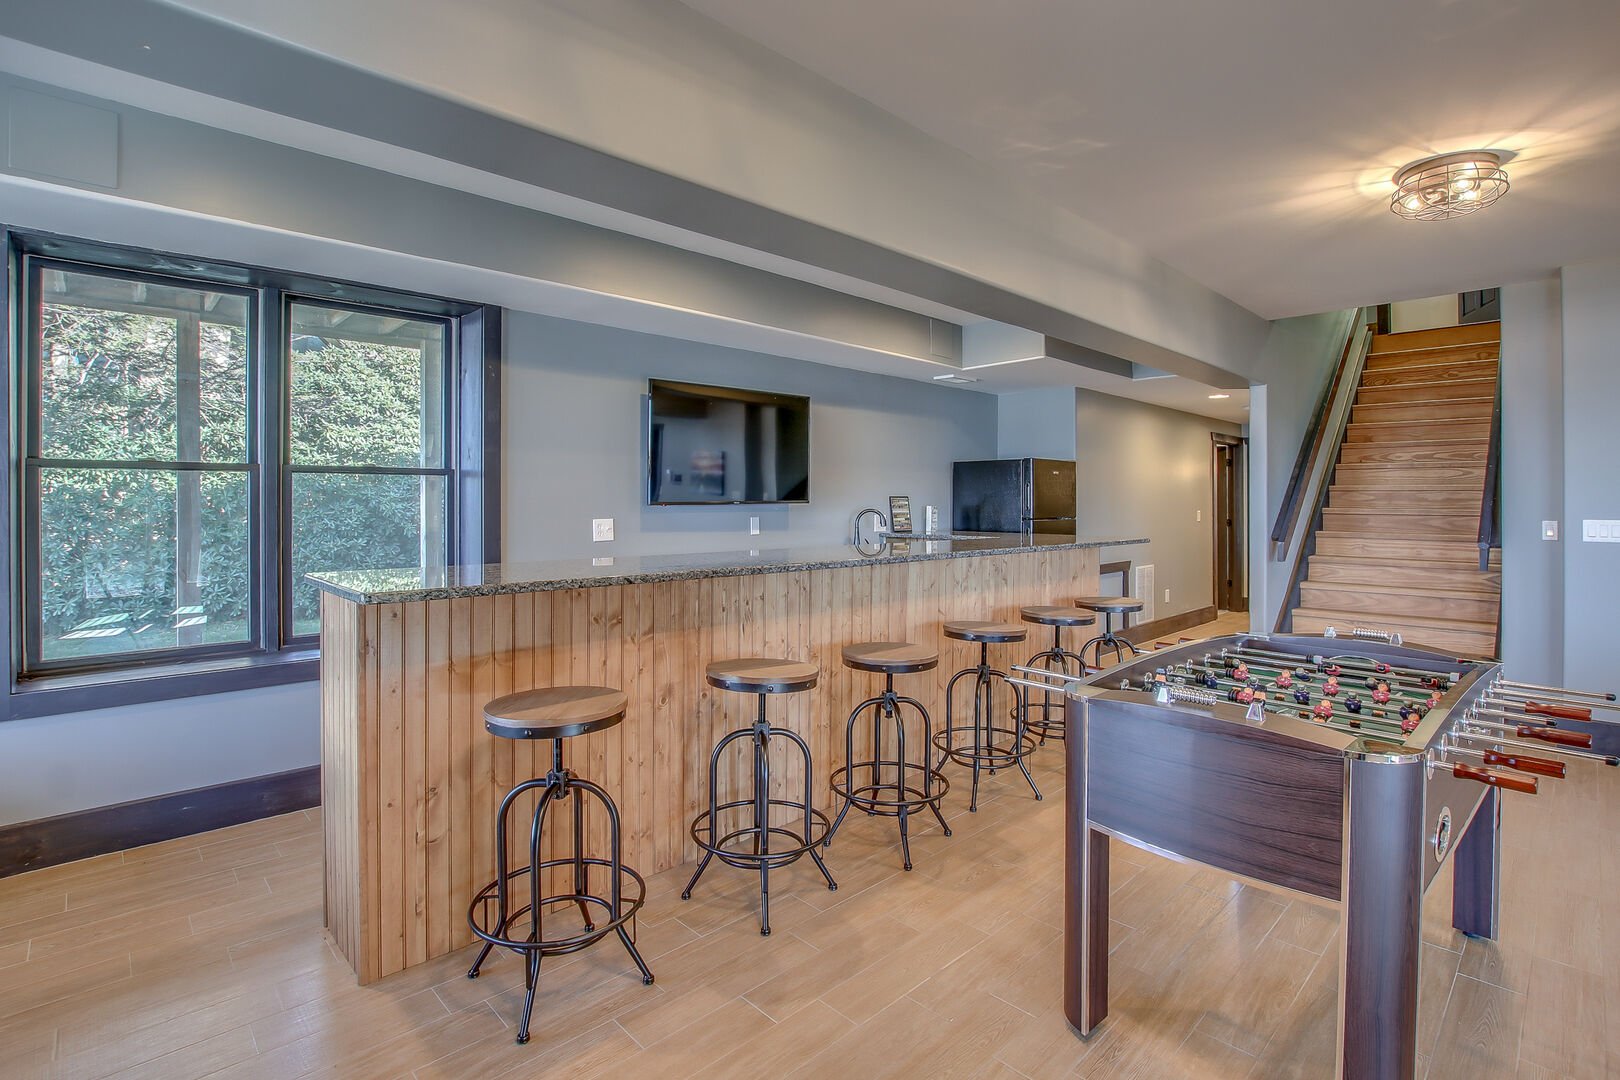 Bar seating, TV and Foosball table of game room.